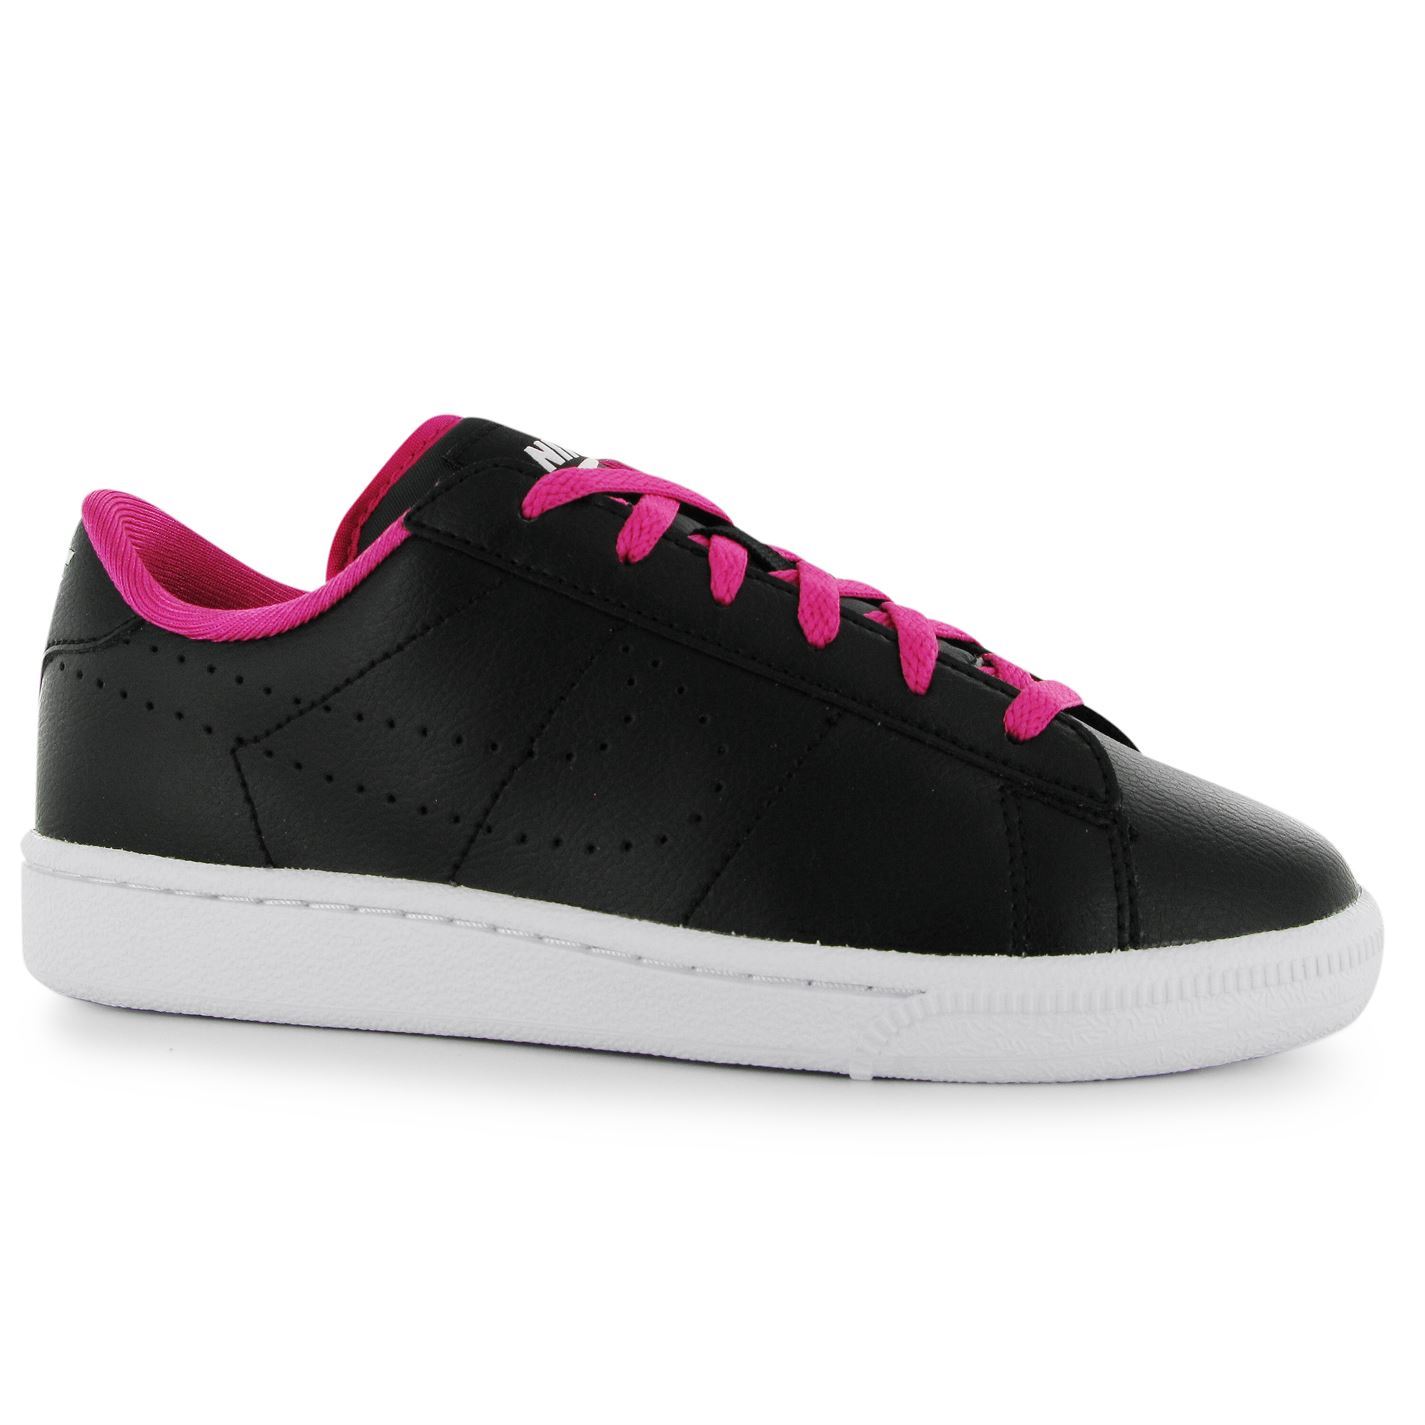 Nike Tennis Class Trainers Juniors Black/Black/Pink Sports Shoes Sneakers